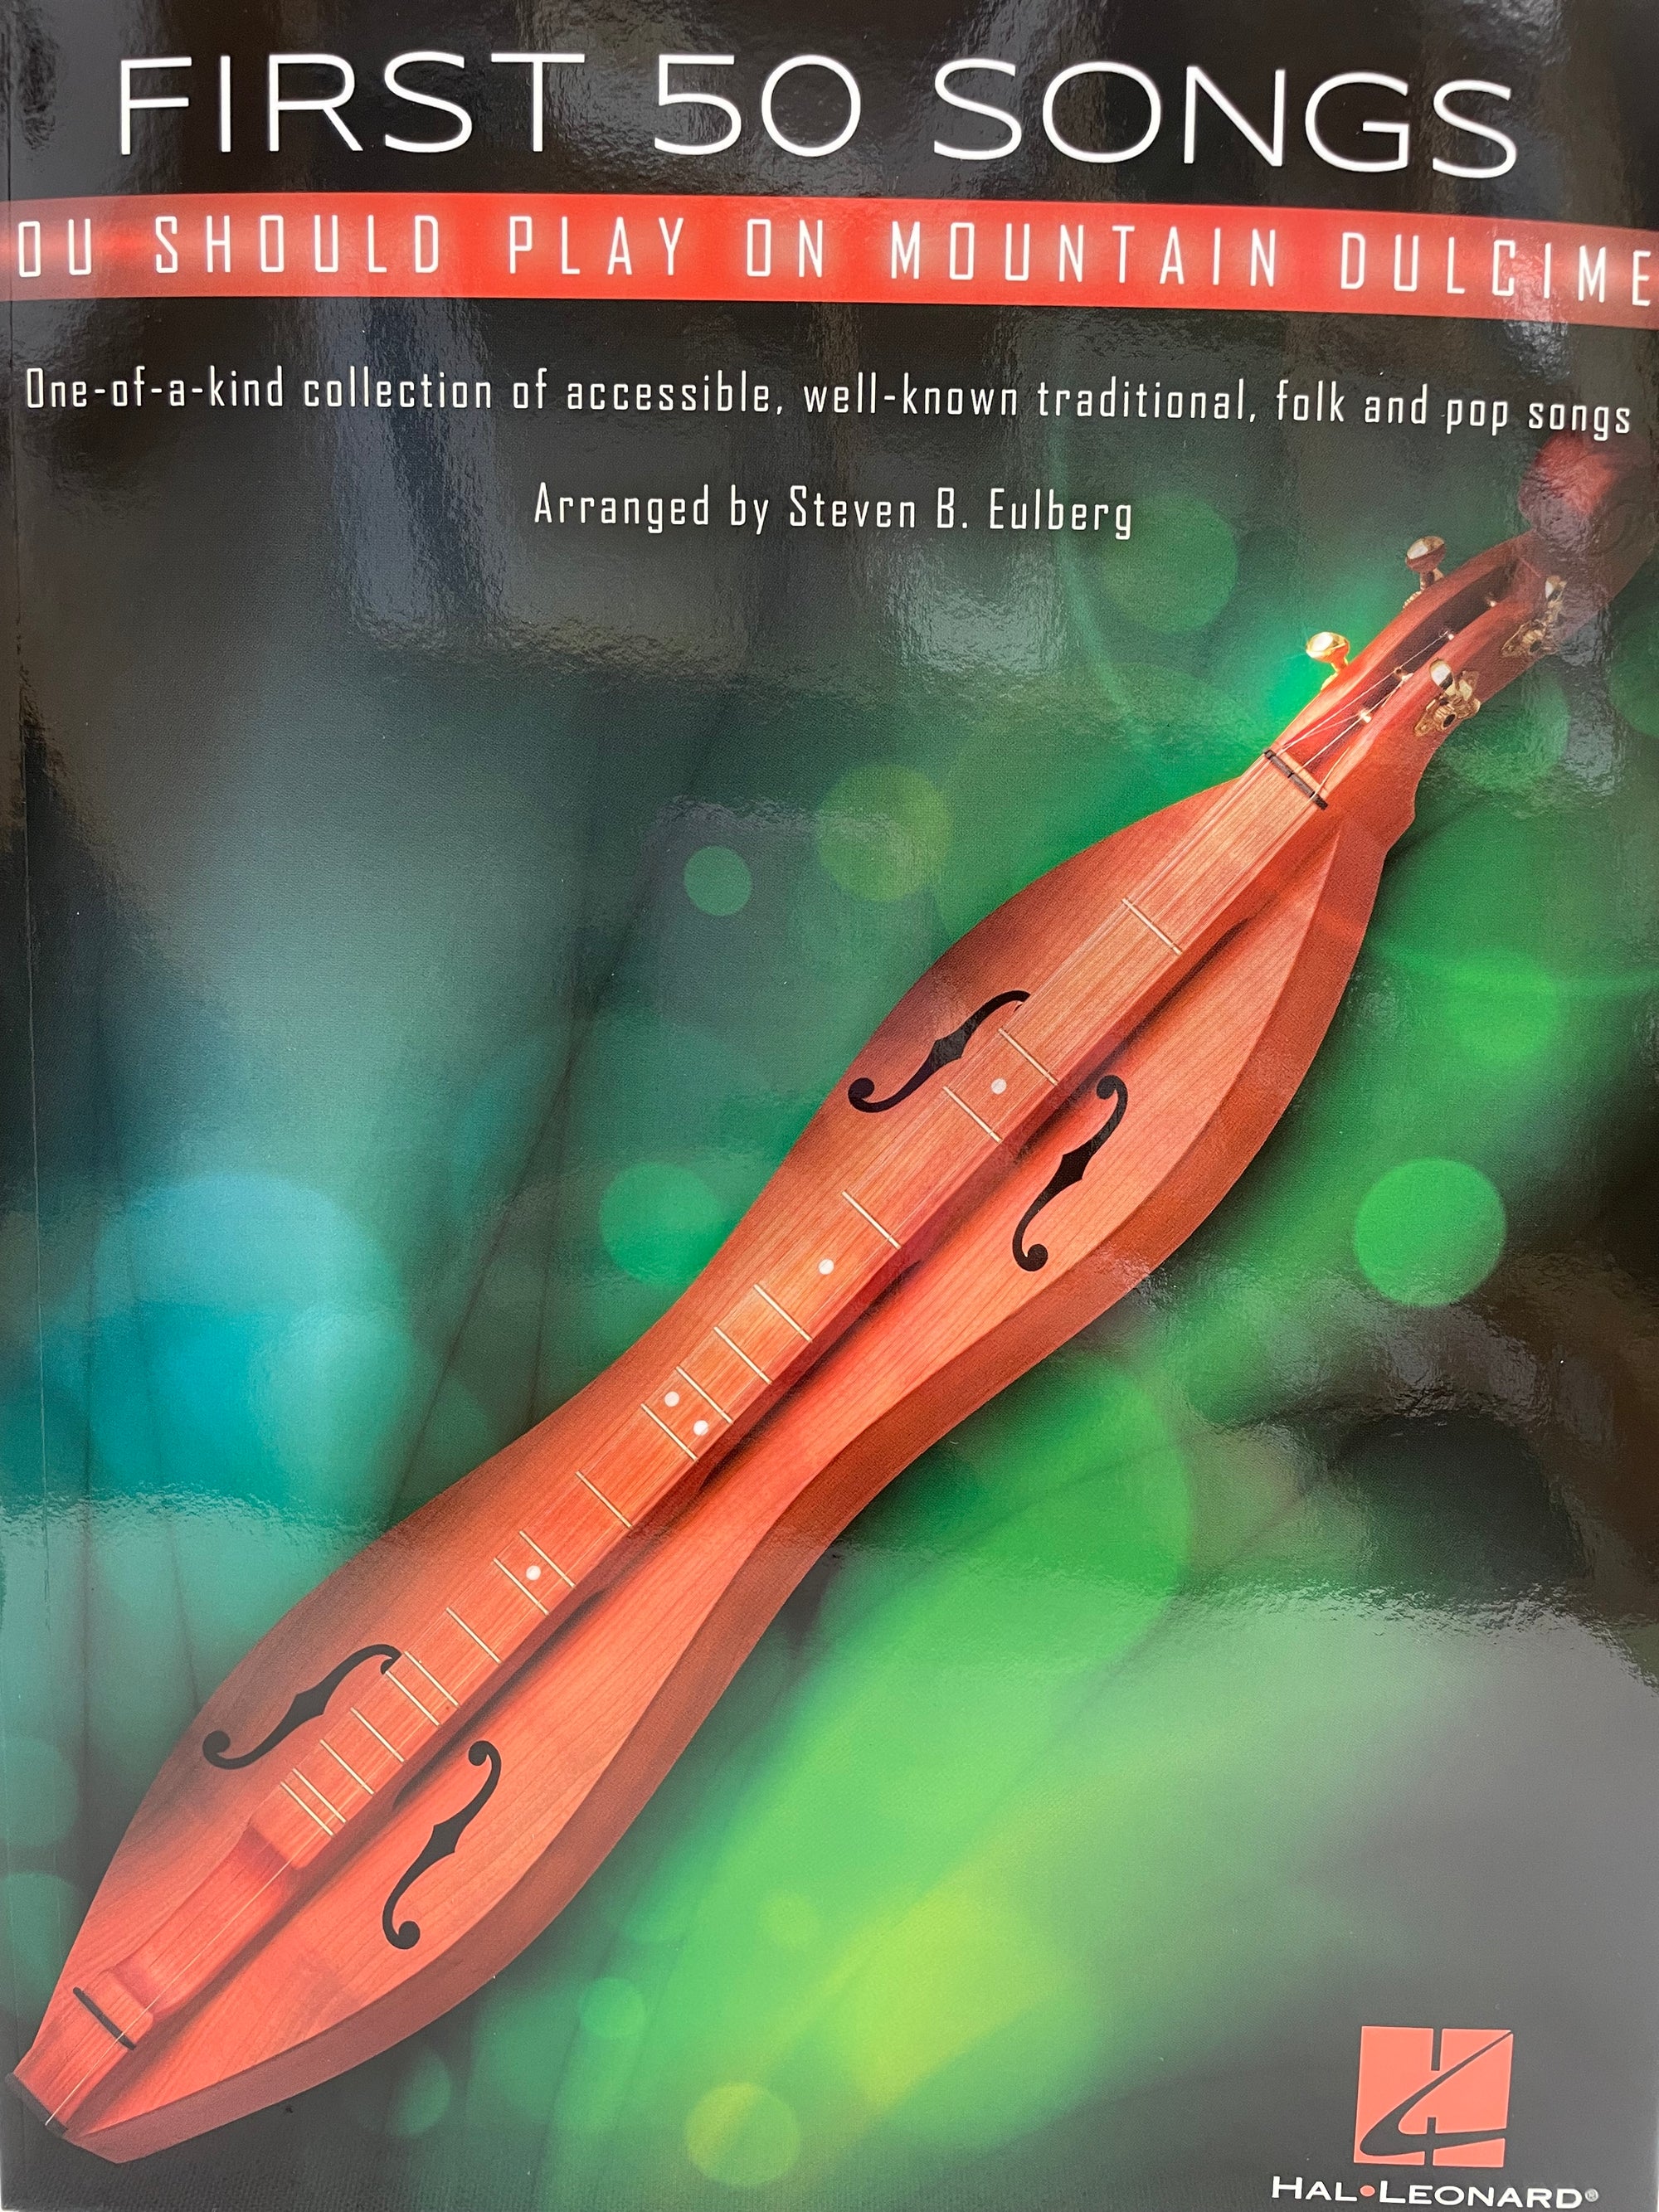 Cover of the music book 'First 50 Songs You Should Play on Mountain Dulcimer by Steven B. Eulberg', featuring a red dulcimer and green abstract background.